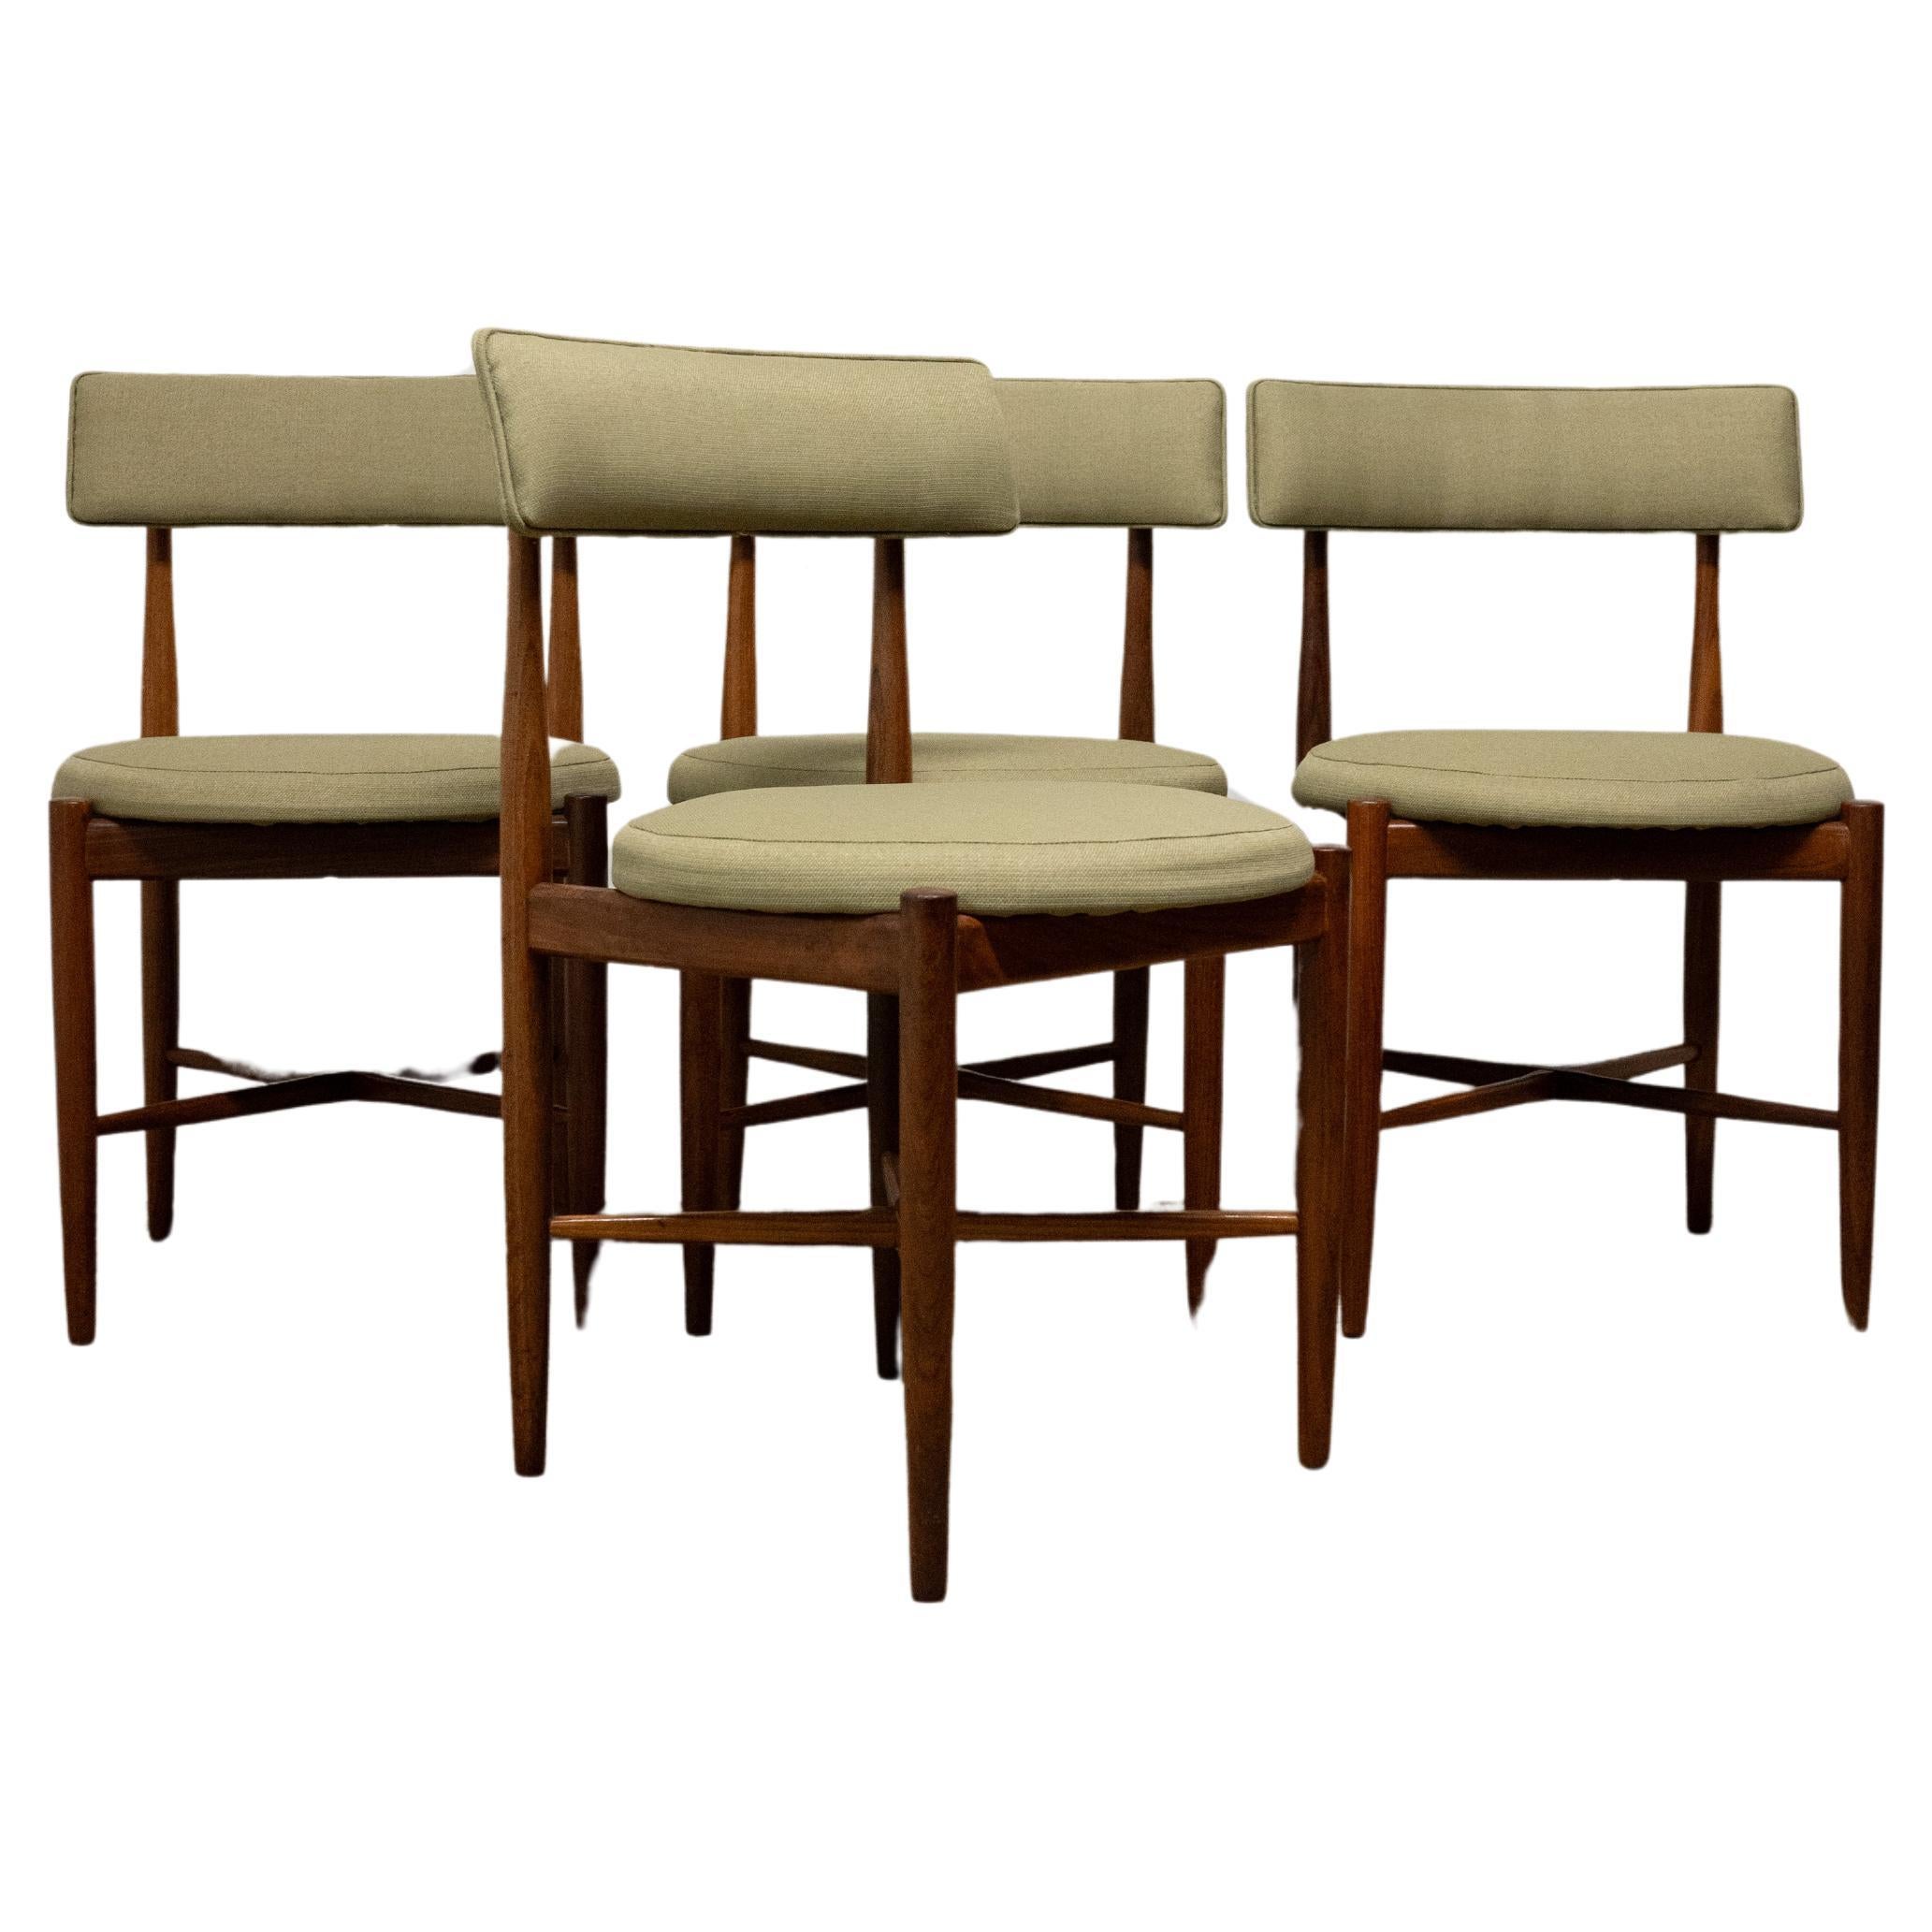 G Plan Teak Fresco Dining Chairs by Victor B Wilkins  4  Newly Upholstered